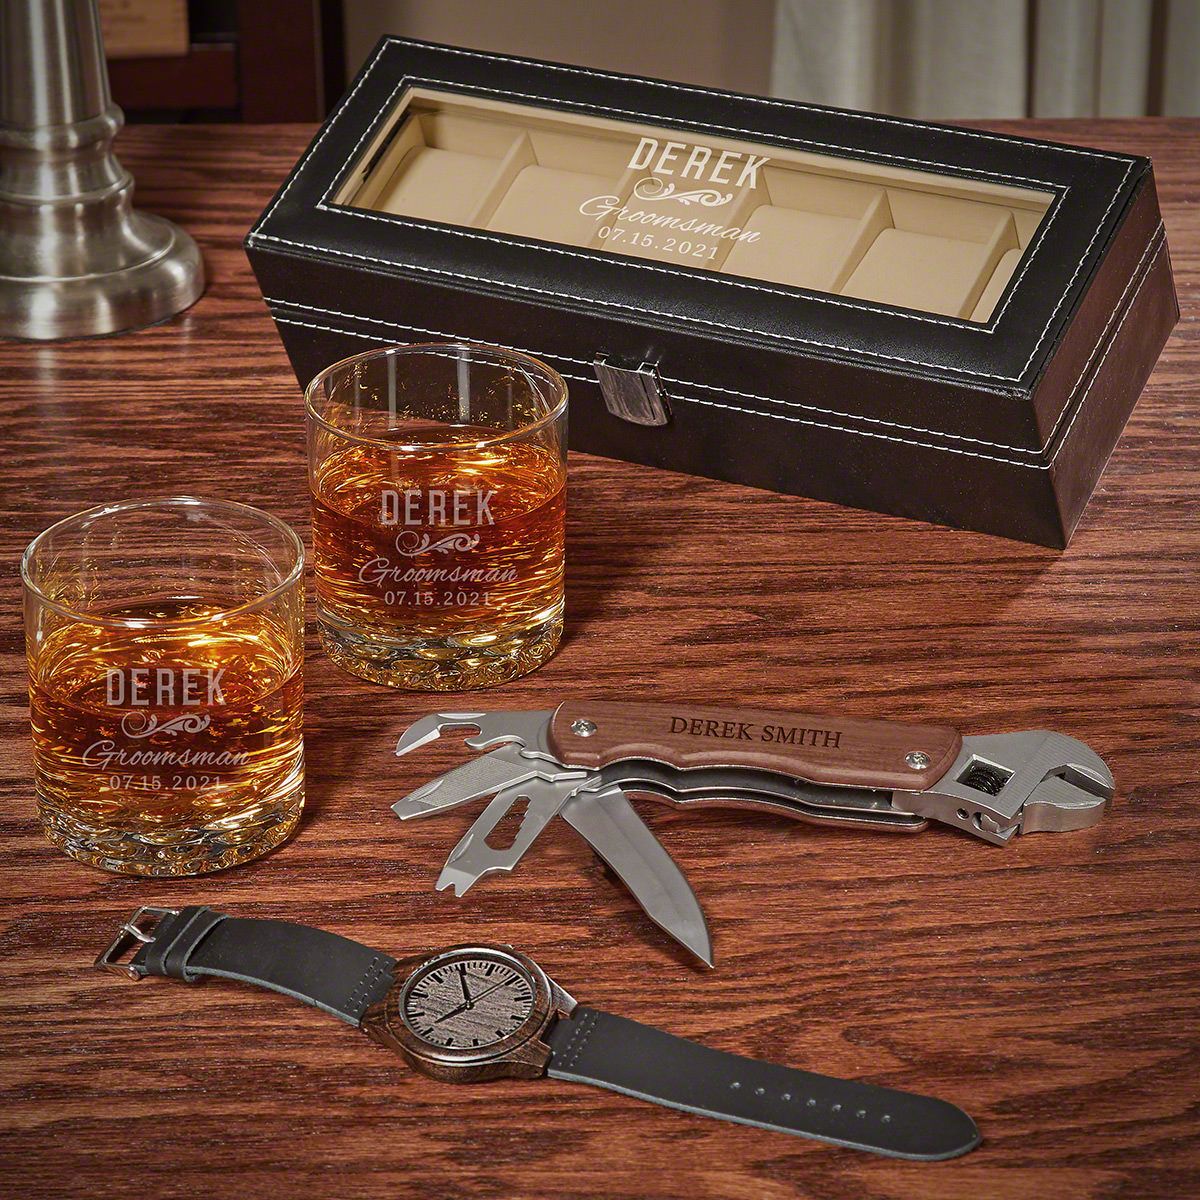 Classic Groomsman Personalized Buckman Glasses and Watch Set Unique Groomsmen Gifts